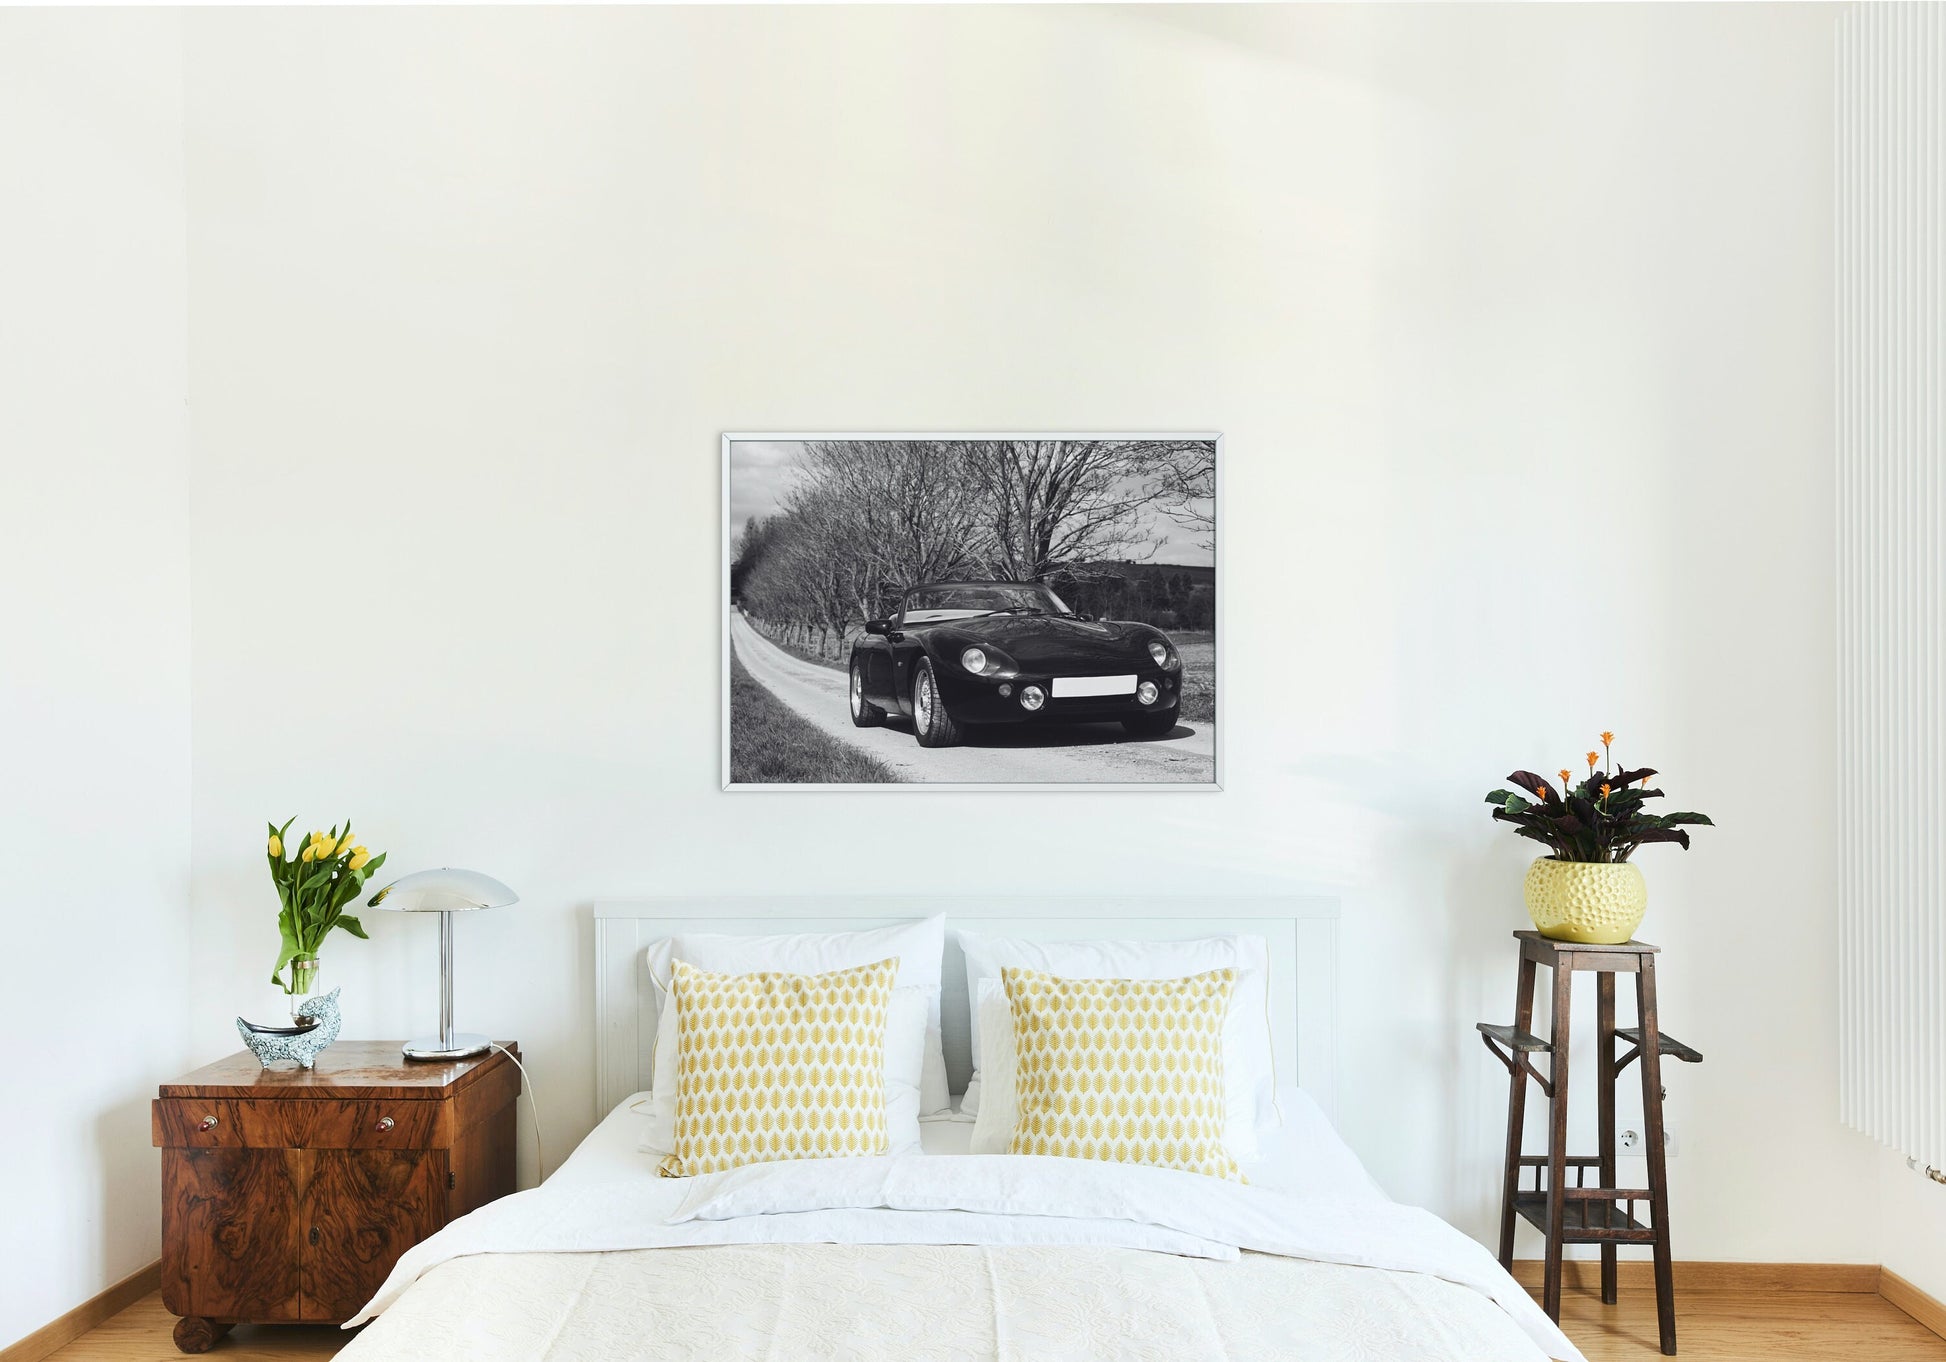 Black & White Luxury Vintage Car in the Country DIGITAL PRINT, Horizontal Wall Art, Car Photography, Retro Wall Decor, Old Car Picture, Glam